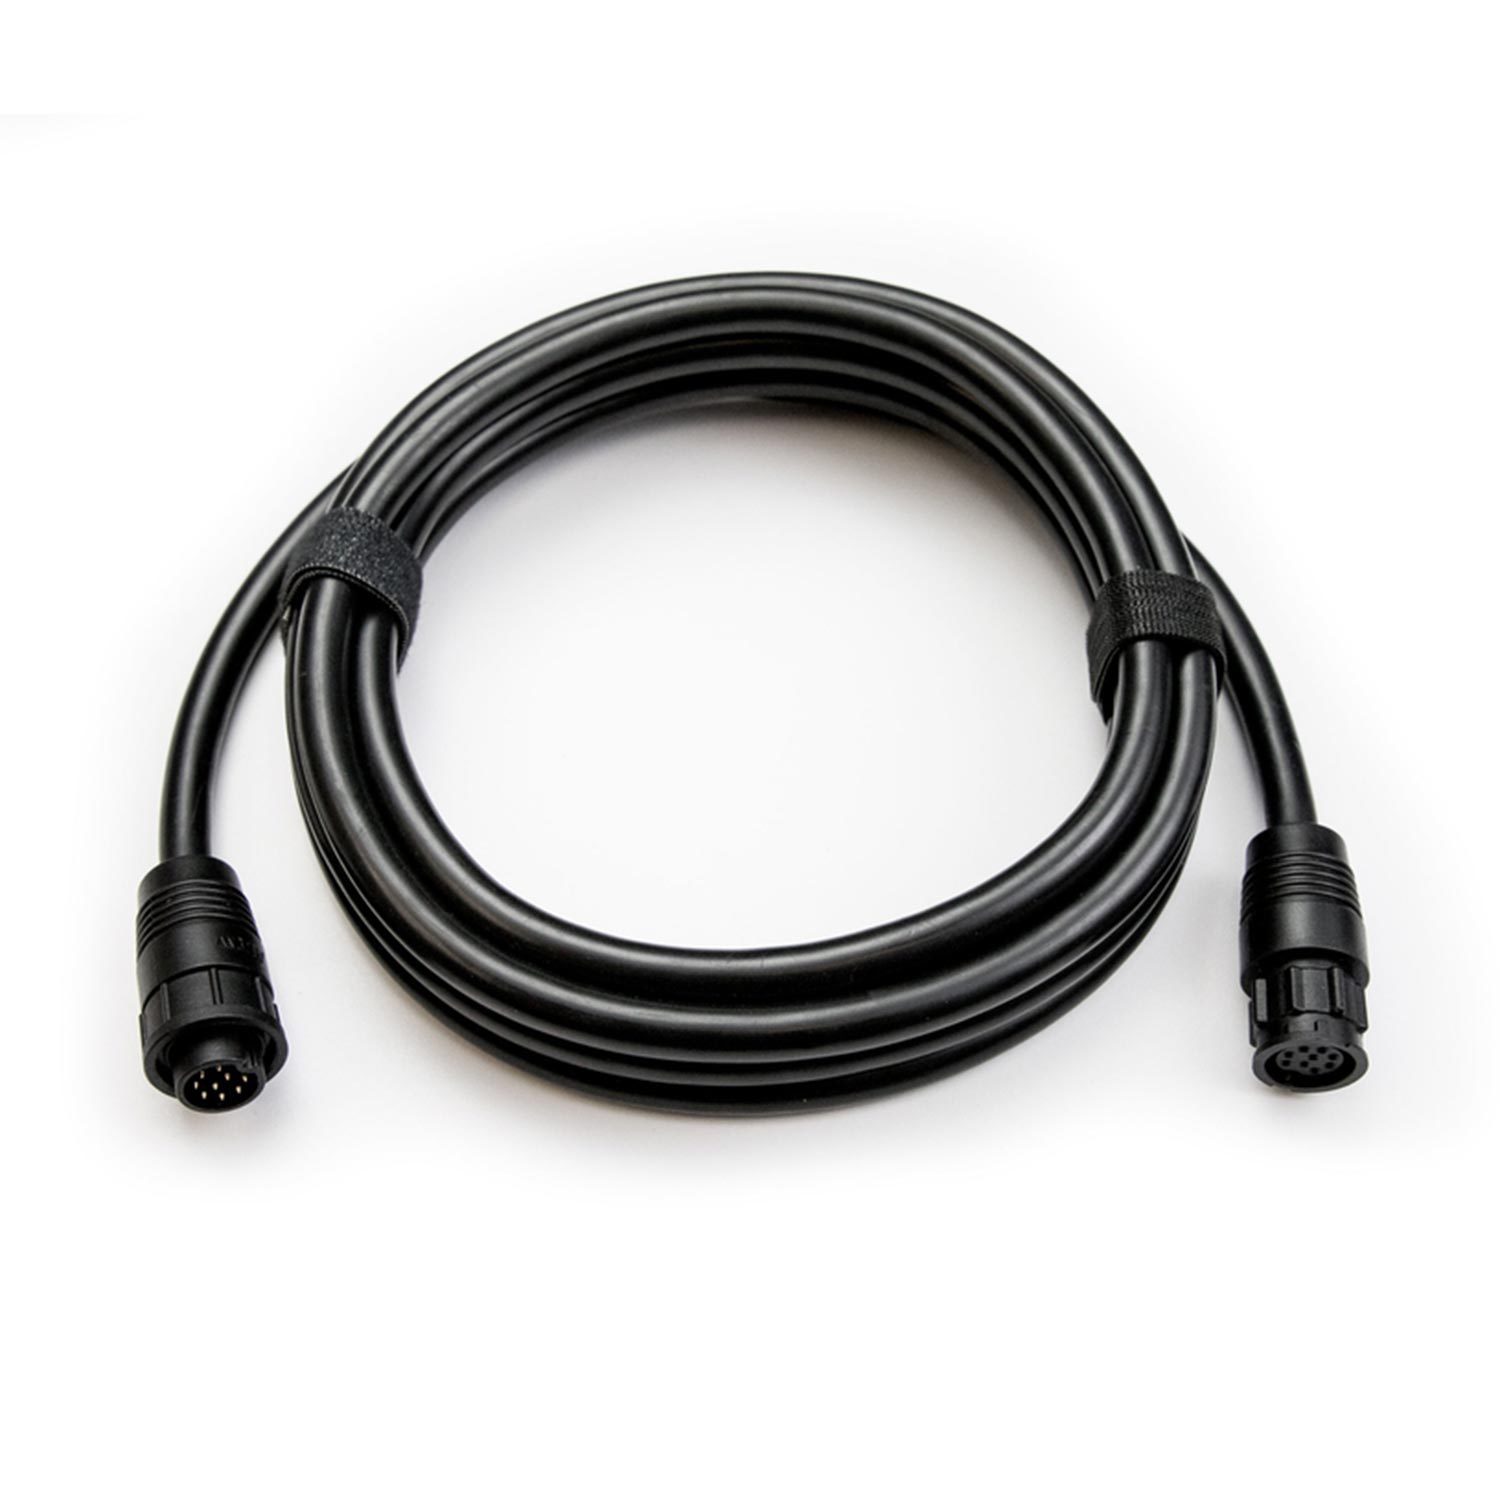 Lowrance Xt-10blk 10ft Cable Extension - 000-00099-006